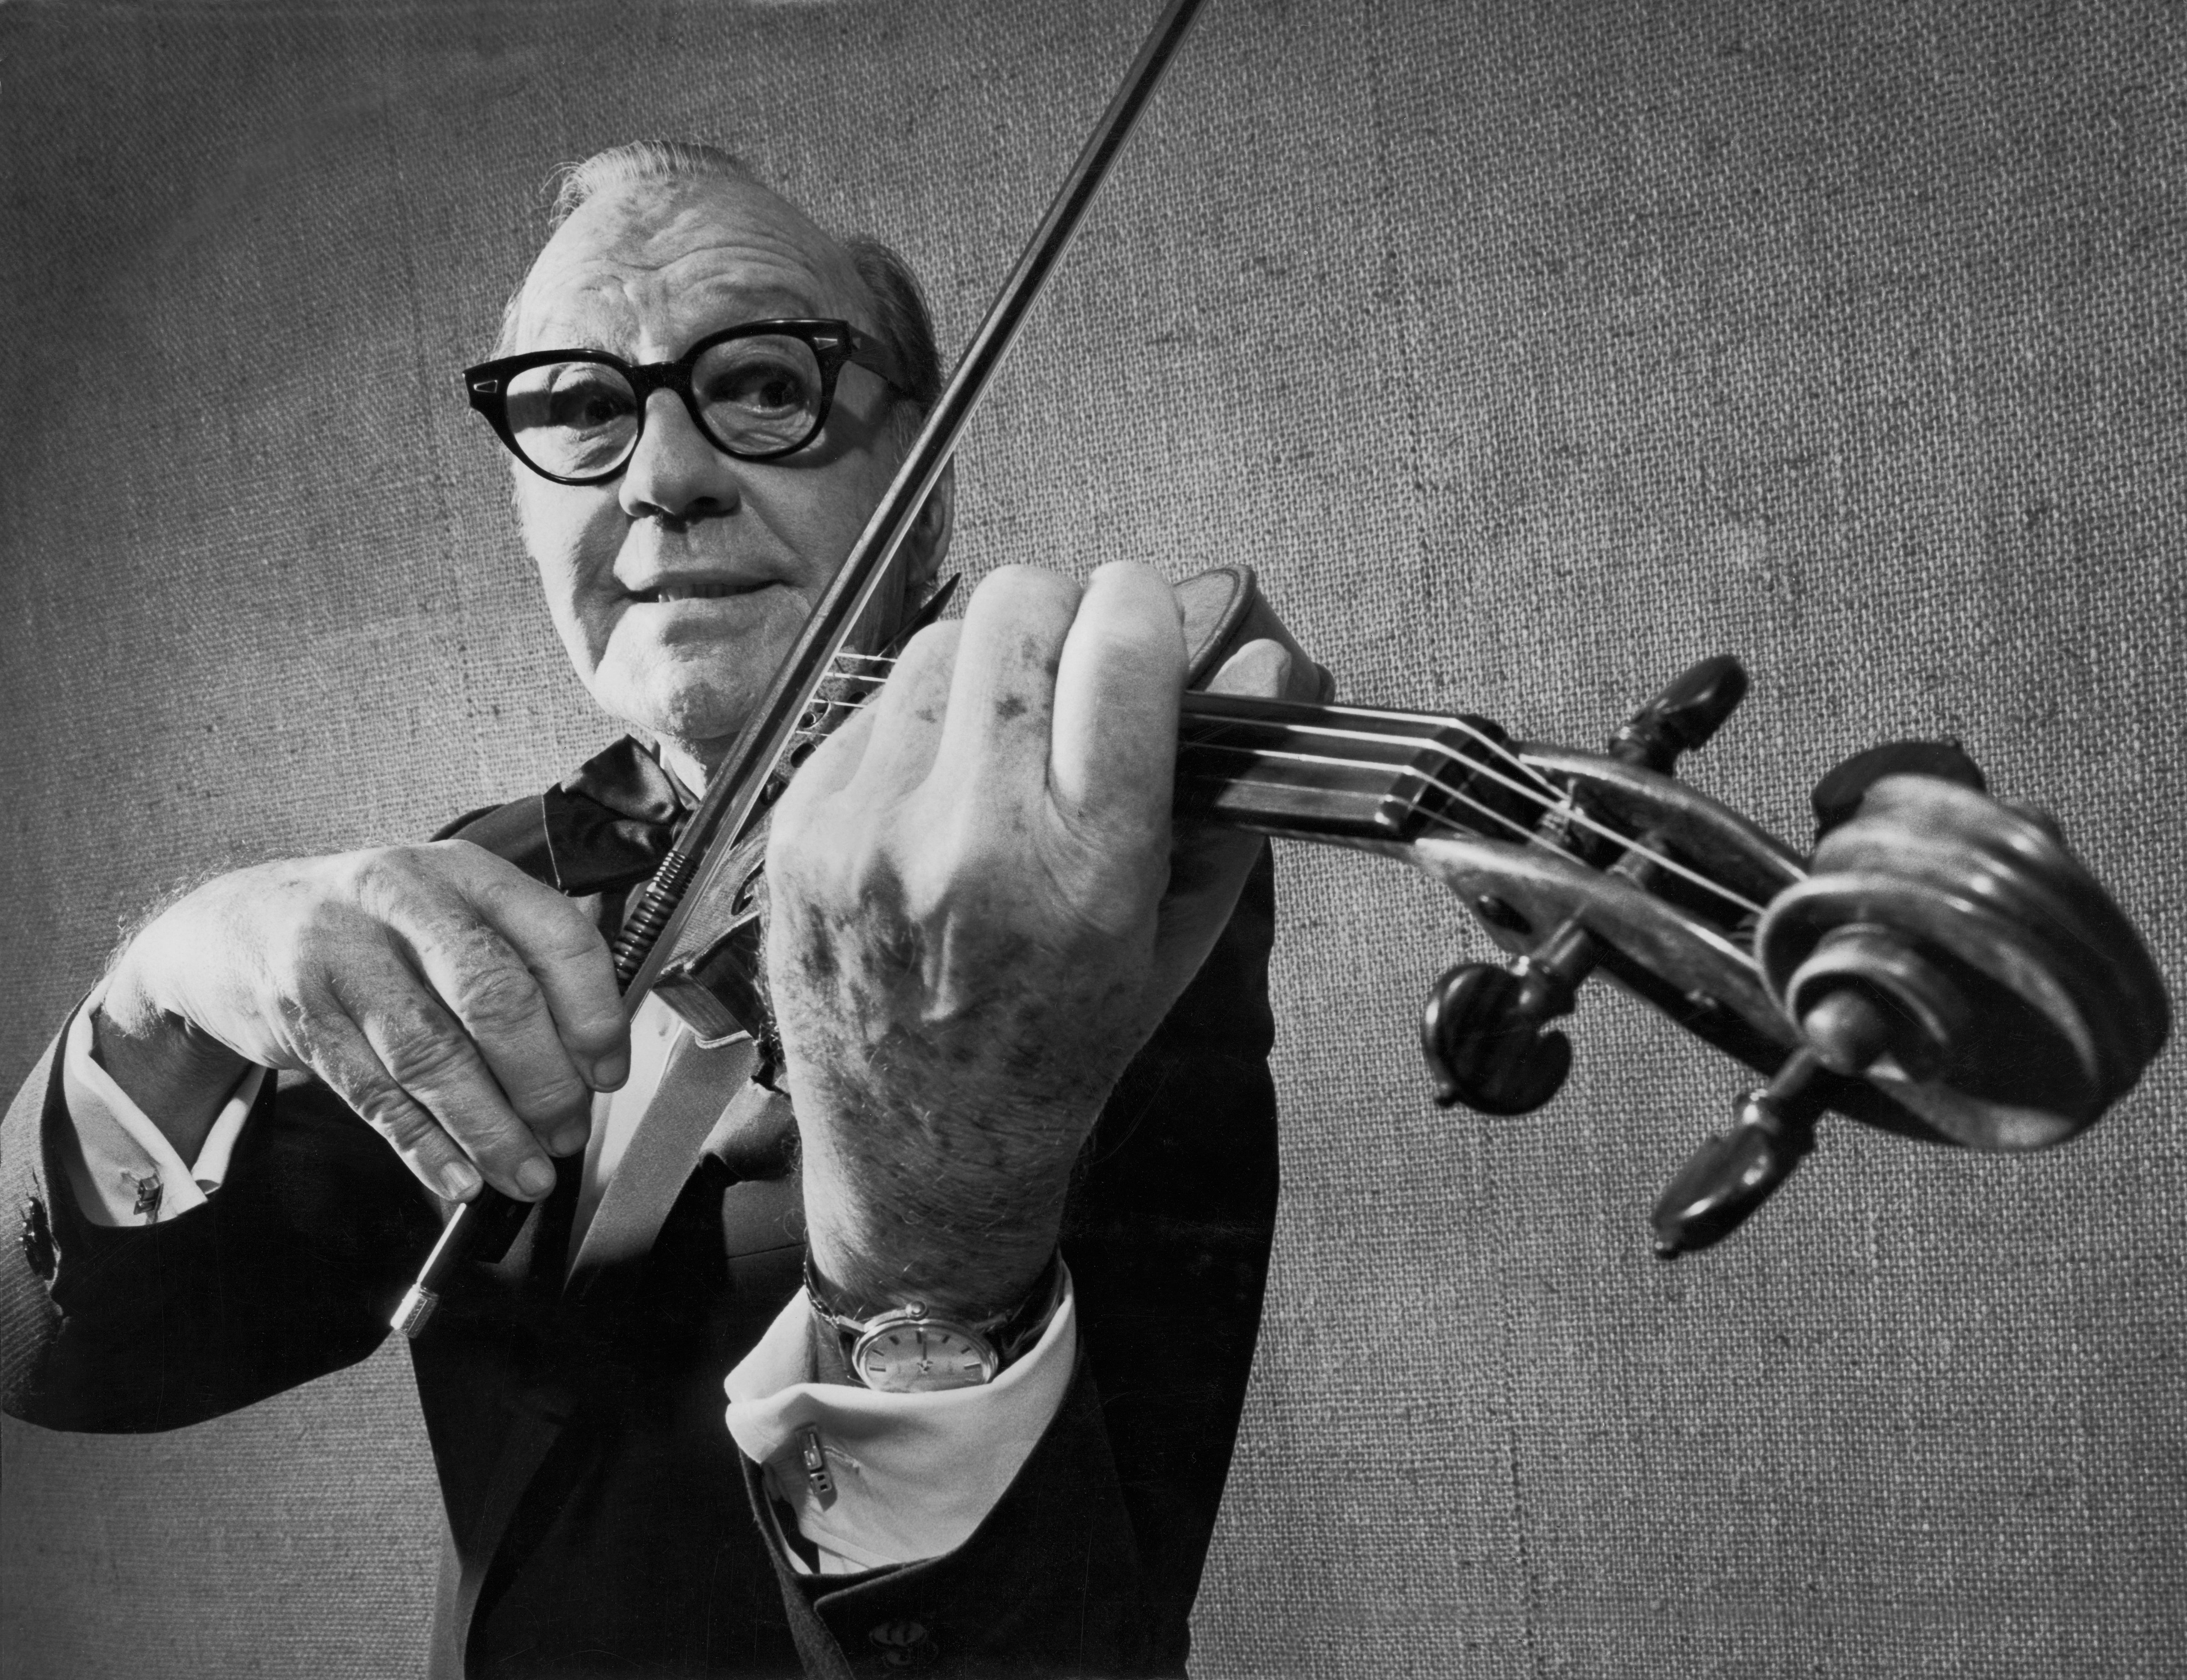 Jack Benny playing the violin in 'Jack Benny's First Farewell' production celebrating his fifty years of entertaining, New York, New York, 1973 | Source: Getty Images